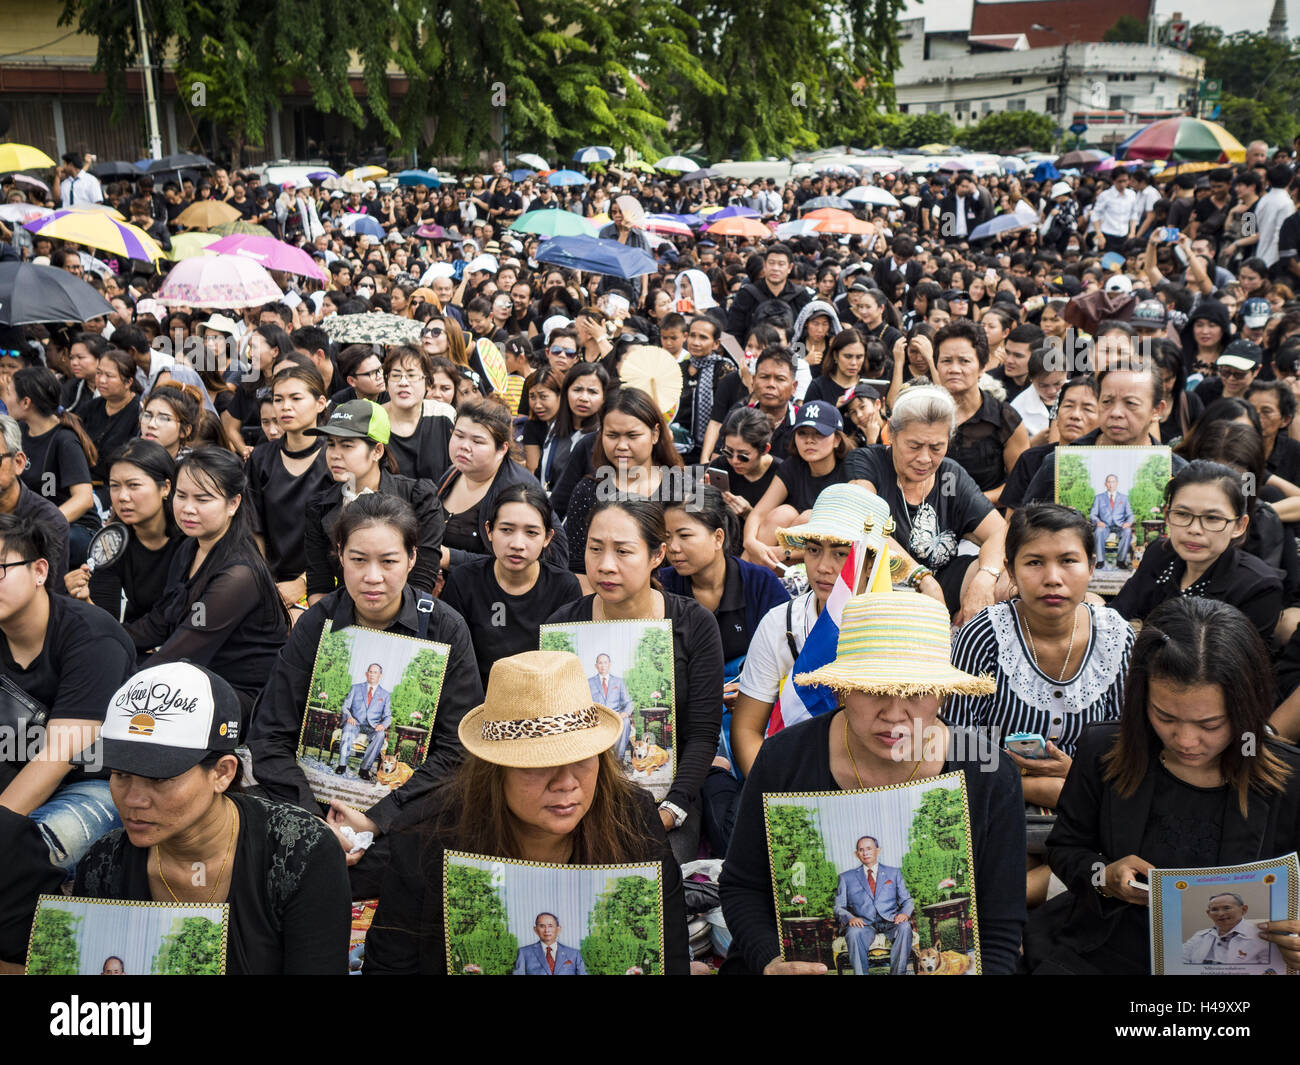 Bangkok, Bangkok, Thailand. 14th Oct, 2016. People wait on Rajadamnoen Avenue in Bangkok for the King's body to be brought to the Grand Palace. King Bhumibol Adulyadej died Oct. 13, 2016. He was 88. His death comes after a period of failing health. With the king's death, the world's longest-reigning monarch is Queen Elizabeth II, who ascended to the British throne in 1952. Bhumibol Adulyadej, was born in Cambridge, MA, on 5 December 1927. He was the ninth monarch of Thailand from the Chakri Dynasty and is known as Rama IX. Credit:  ZUMA Press, Inc./Alamy Live News Stock Photo